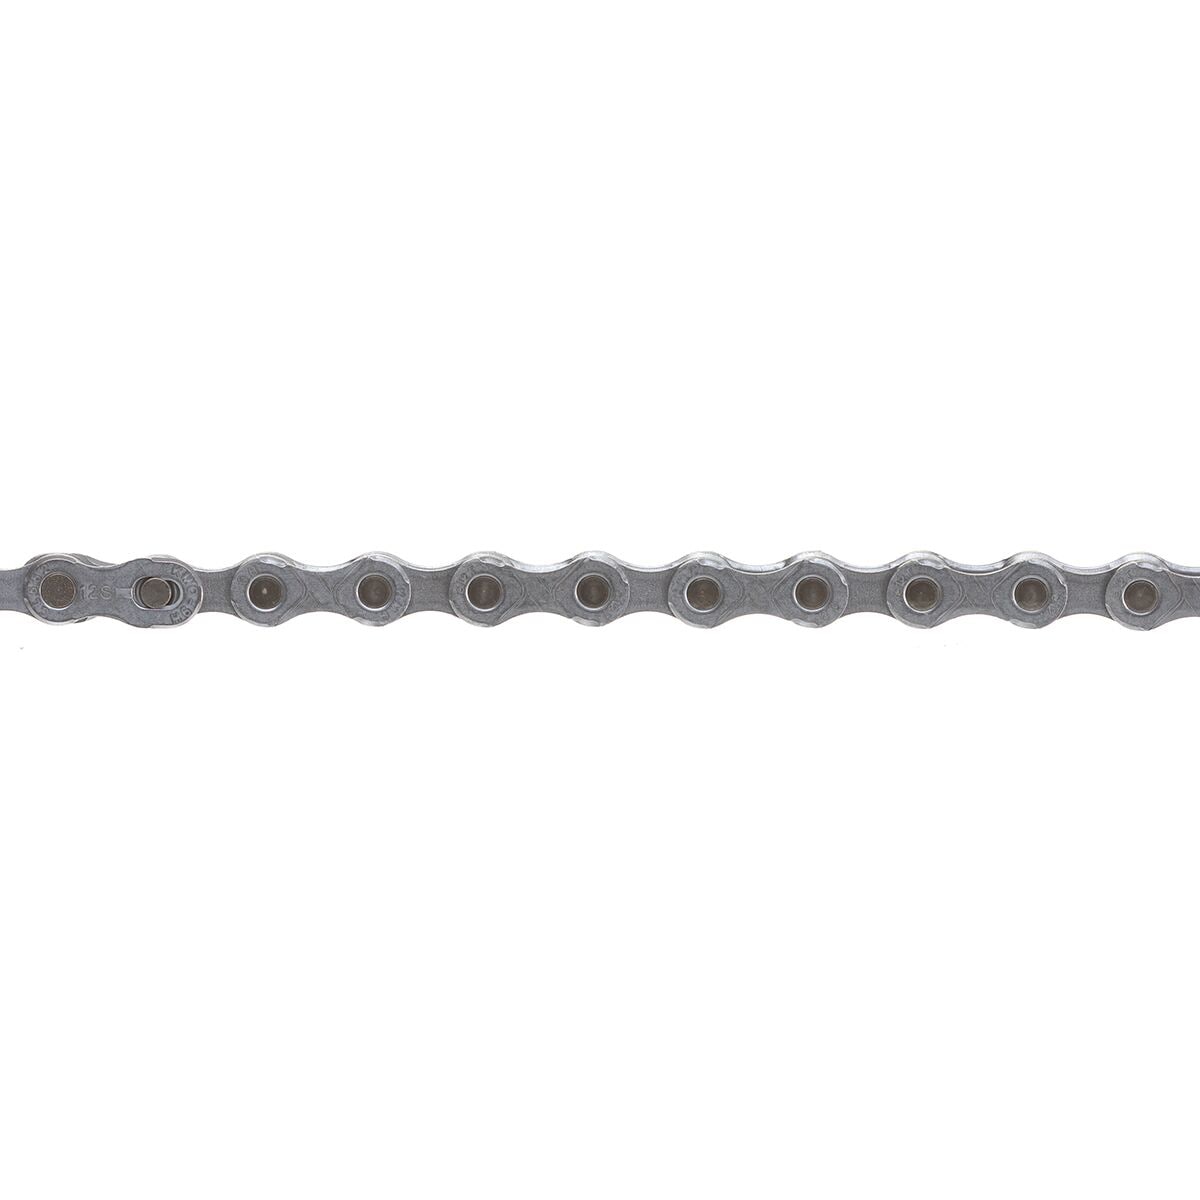 KMC E12 EPT Chain - 12-Speed Silver, 136 Links